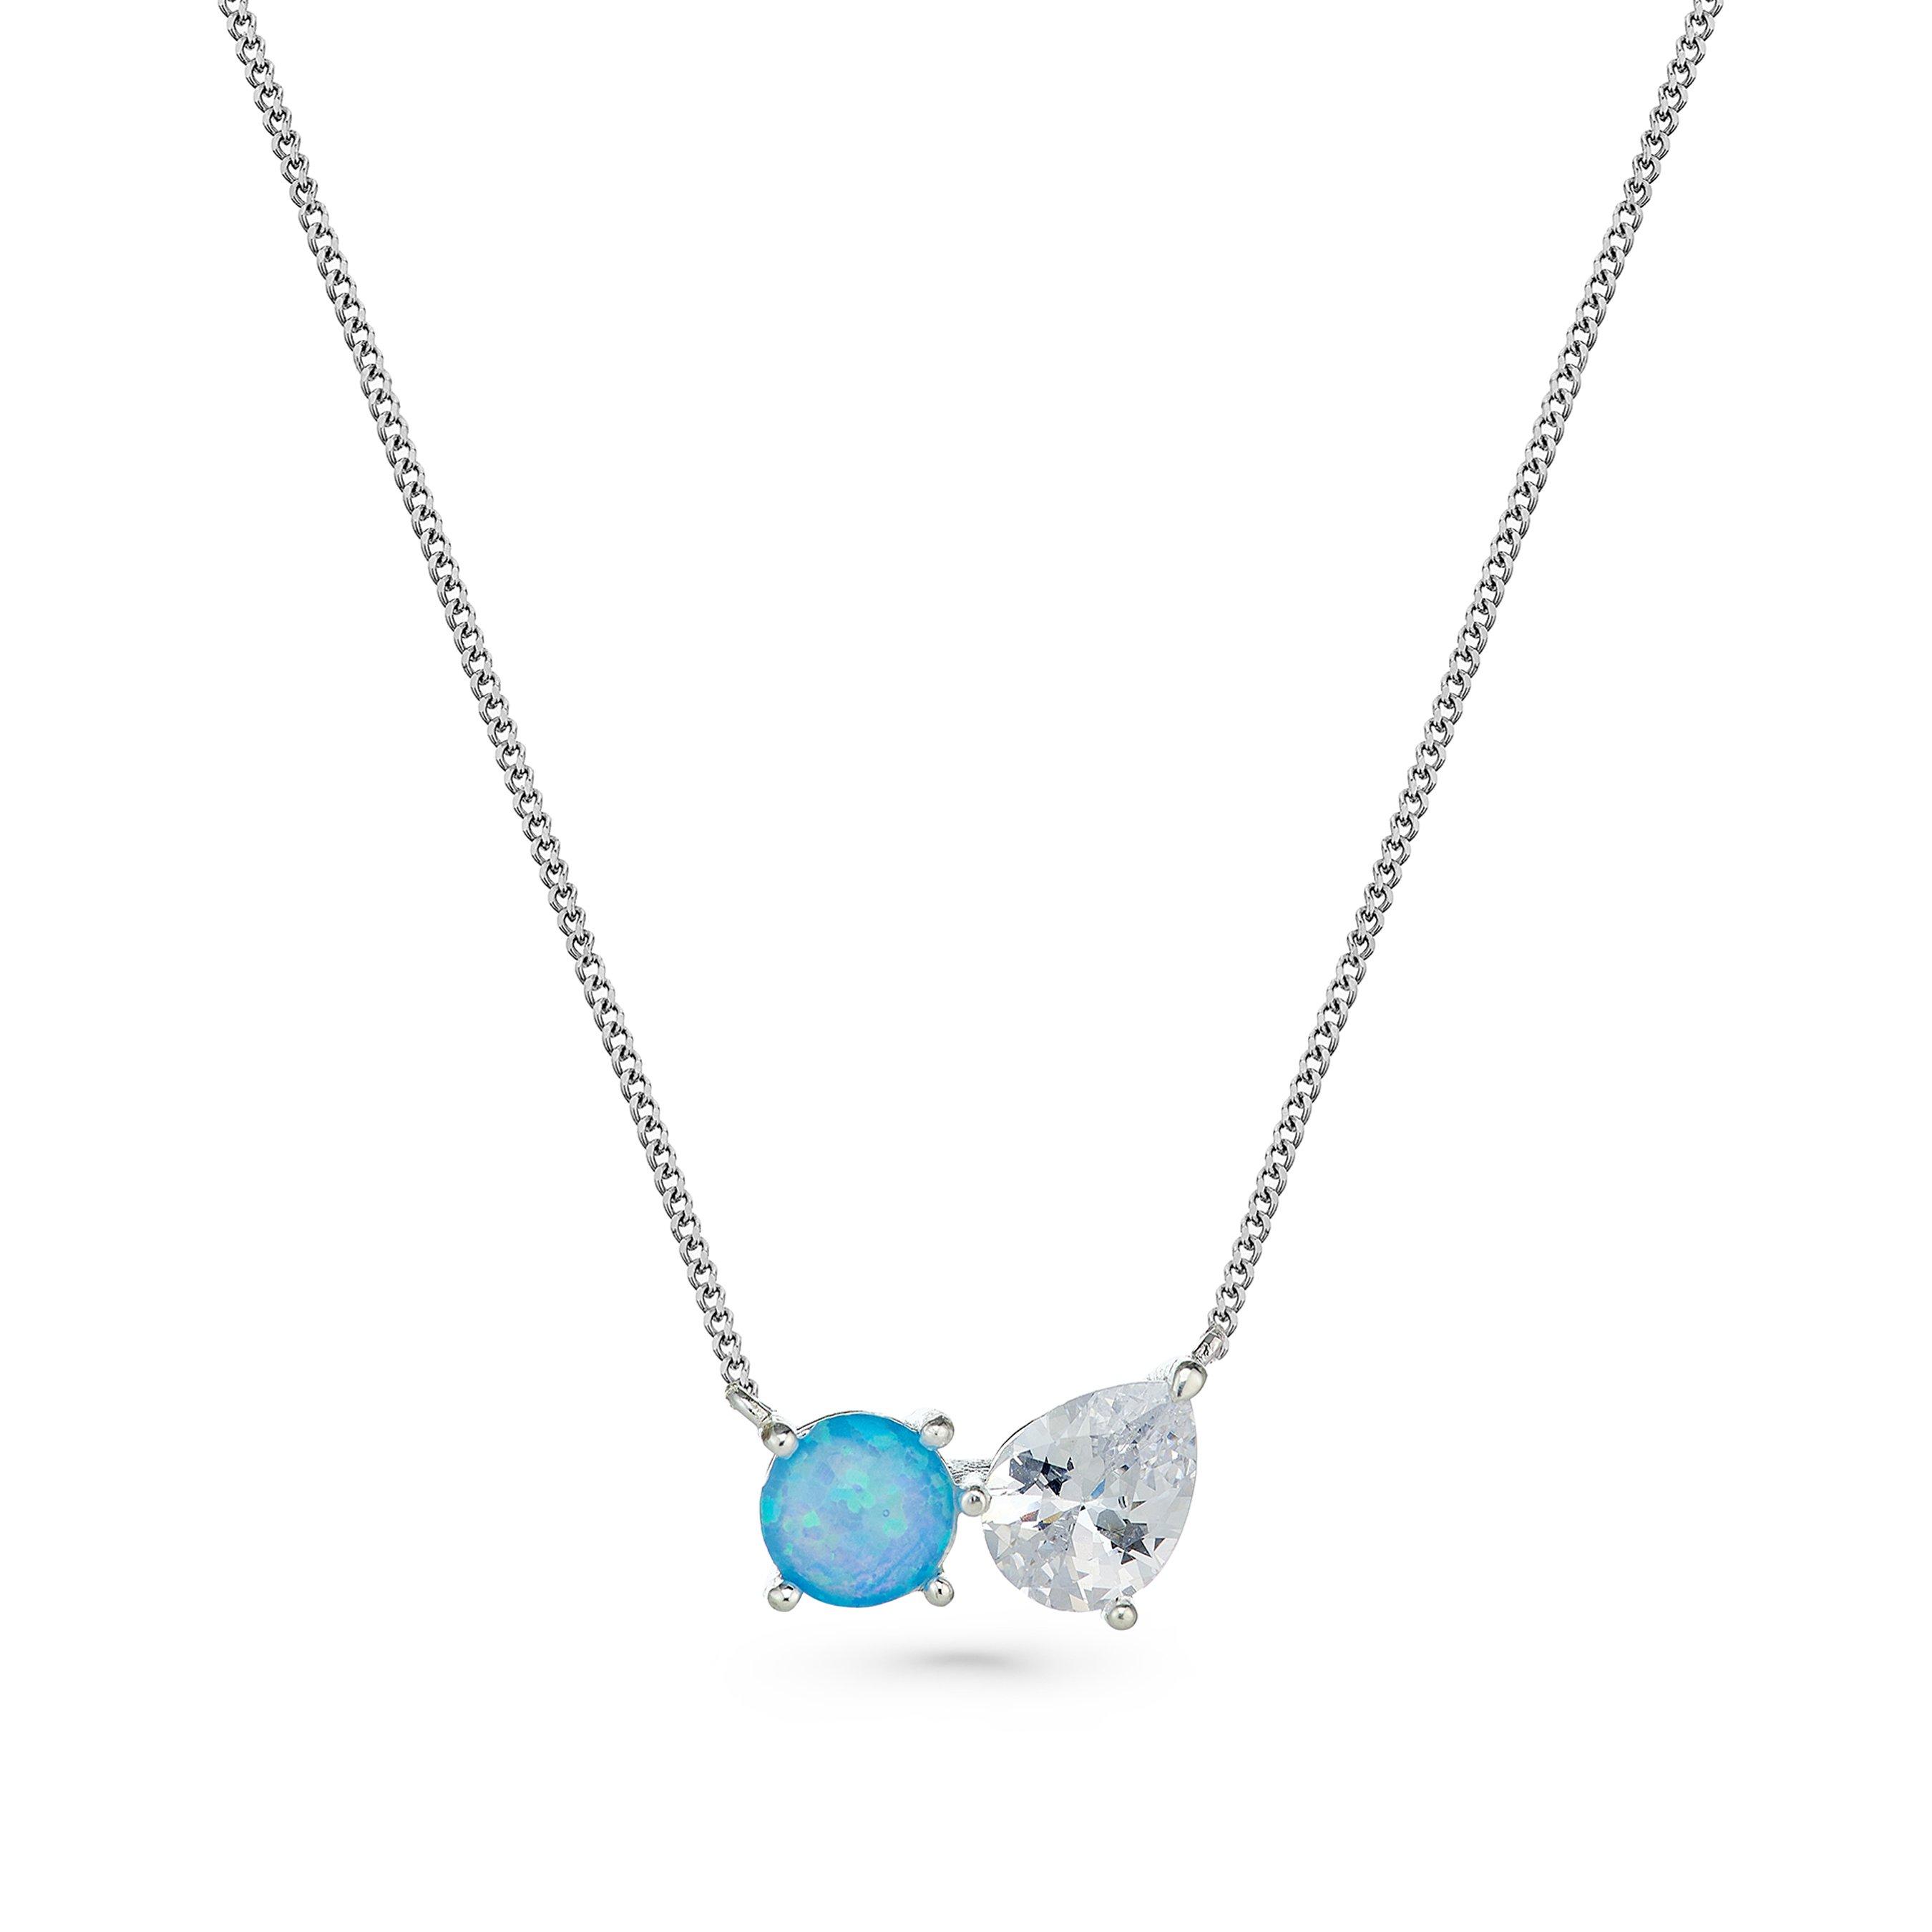 Silver Cubic Zirconia Opal Necklace | 0139389 | Beaverbrooks the Jewellers